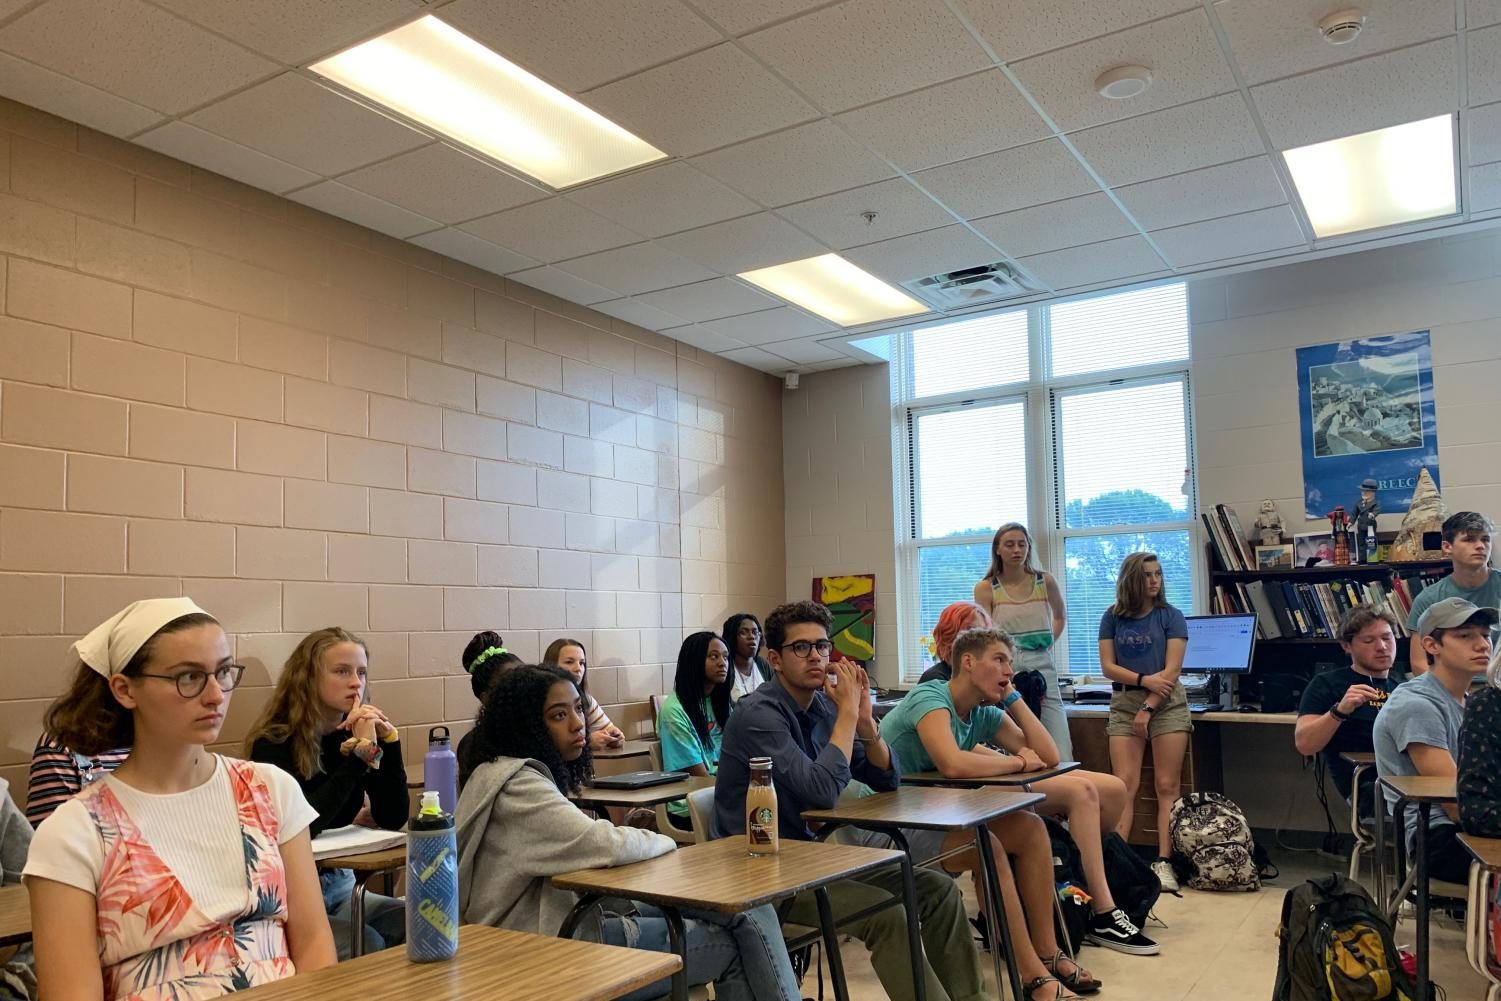 Student senate meeting on 9/11/19 discussing what to do about the gender categories policy for homecoming.